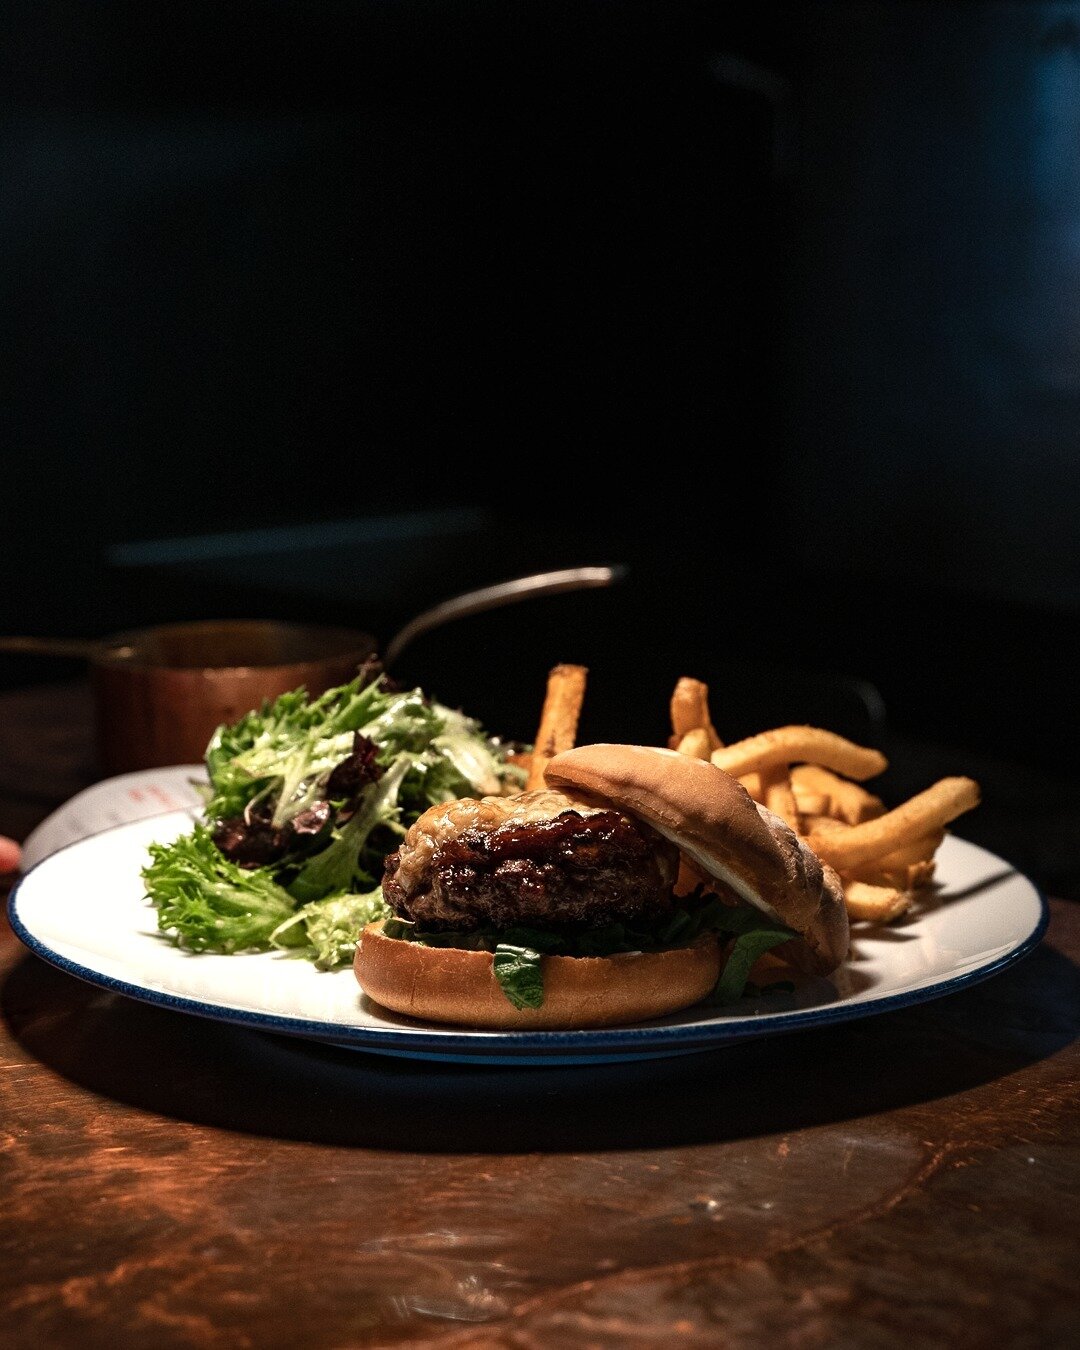 Burger maison, frites. House ground beef, caramelized onions, raclette cheese, fries, salad.⁠
⁠
Available during weekday lunch and weekend brunch -- until 5 pm.